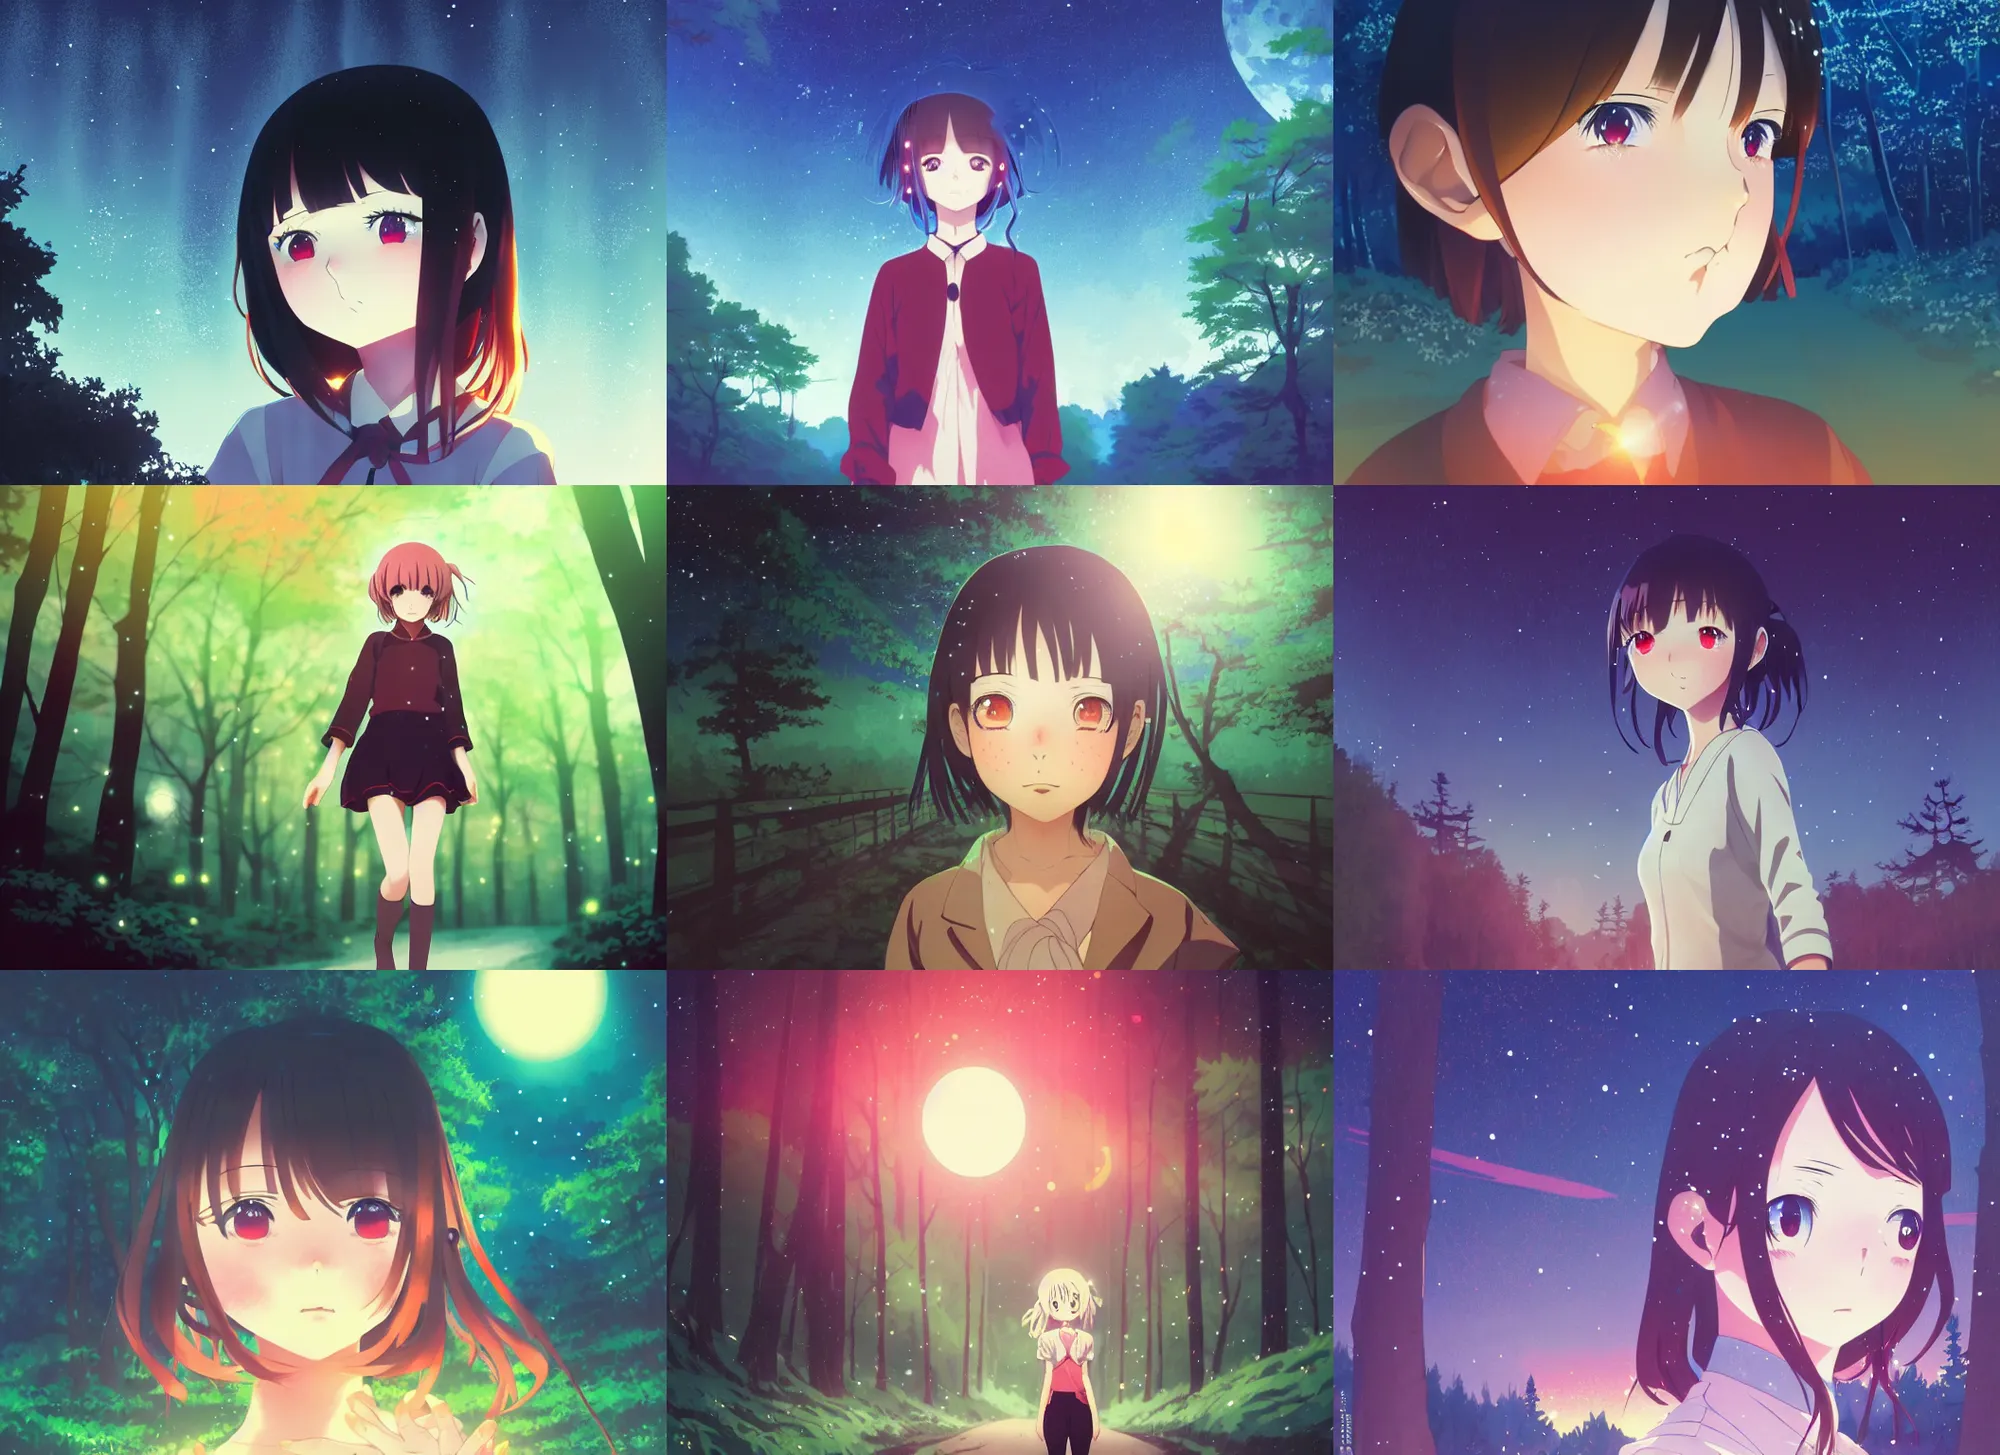 Prompt: anime key visual, young woman traveling in a forest at night, night sky, very dark, cute face by ilya kuvshinov, yoh yoshinari, dynamic pose, dynamic perspective, rounded eyes, kyoani, smooth facial features, dramatic lighting, tatami galaxy, takashi murakami